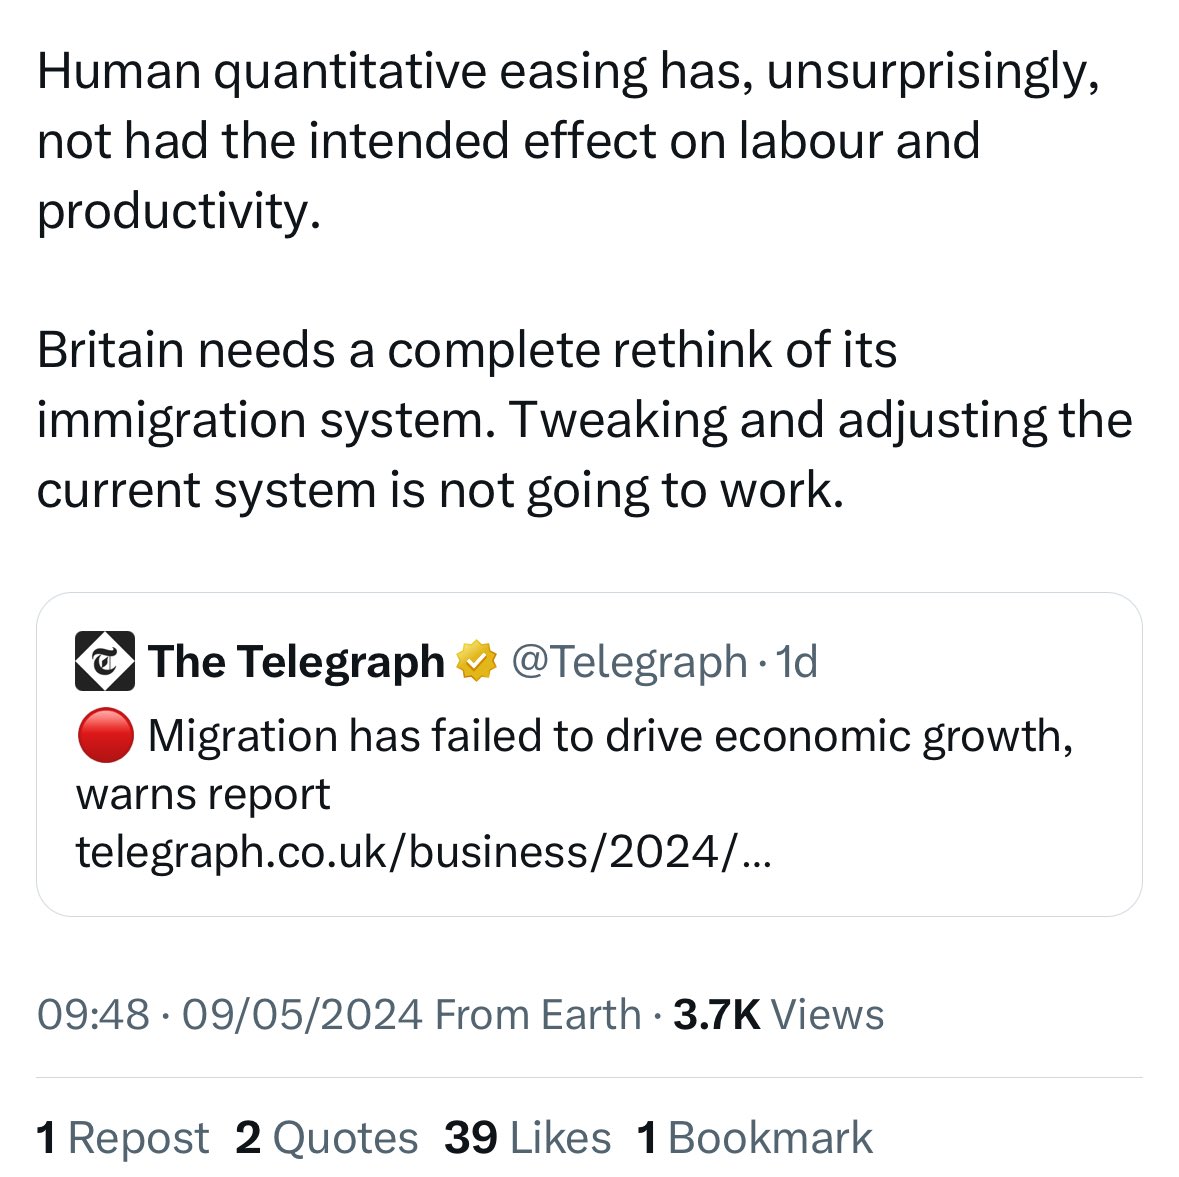 This racist meme that immigration causes(?) low productivity is so odd. What jobs do these right wingers think the immigrants are doing? Would they prefer if those jobs were reserved exclusively for doughty white Englishers?